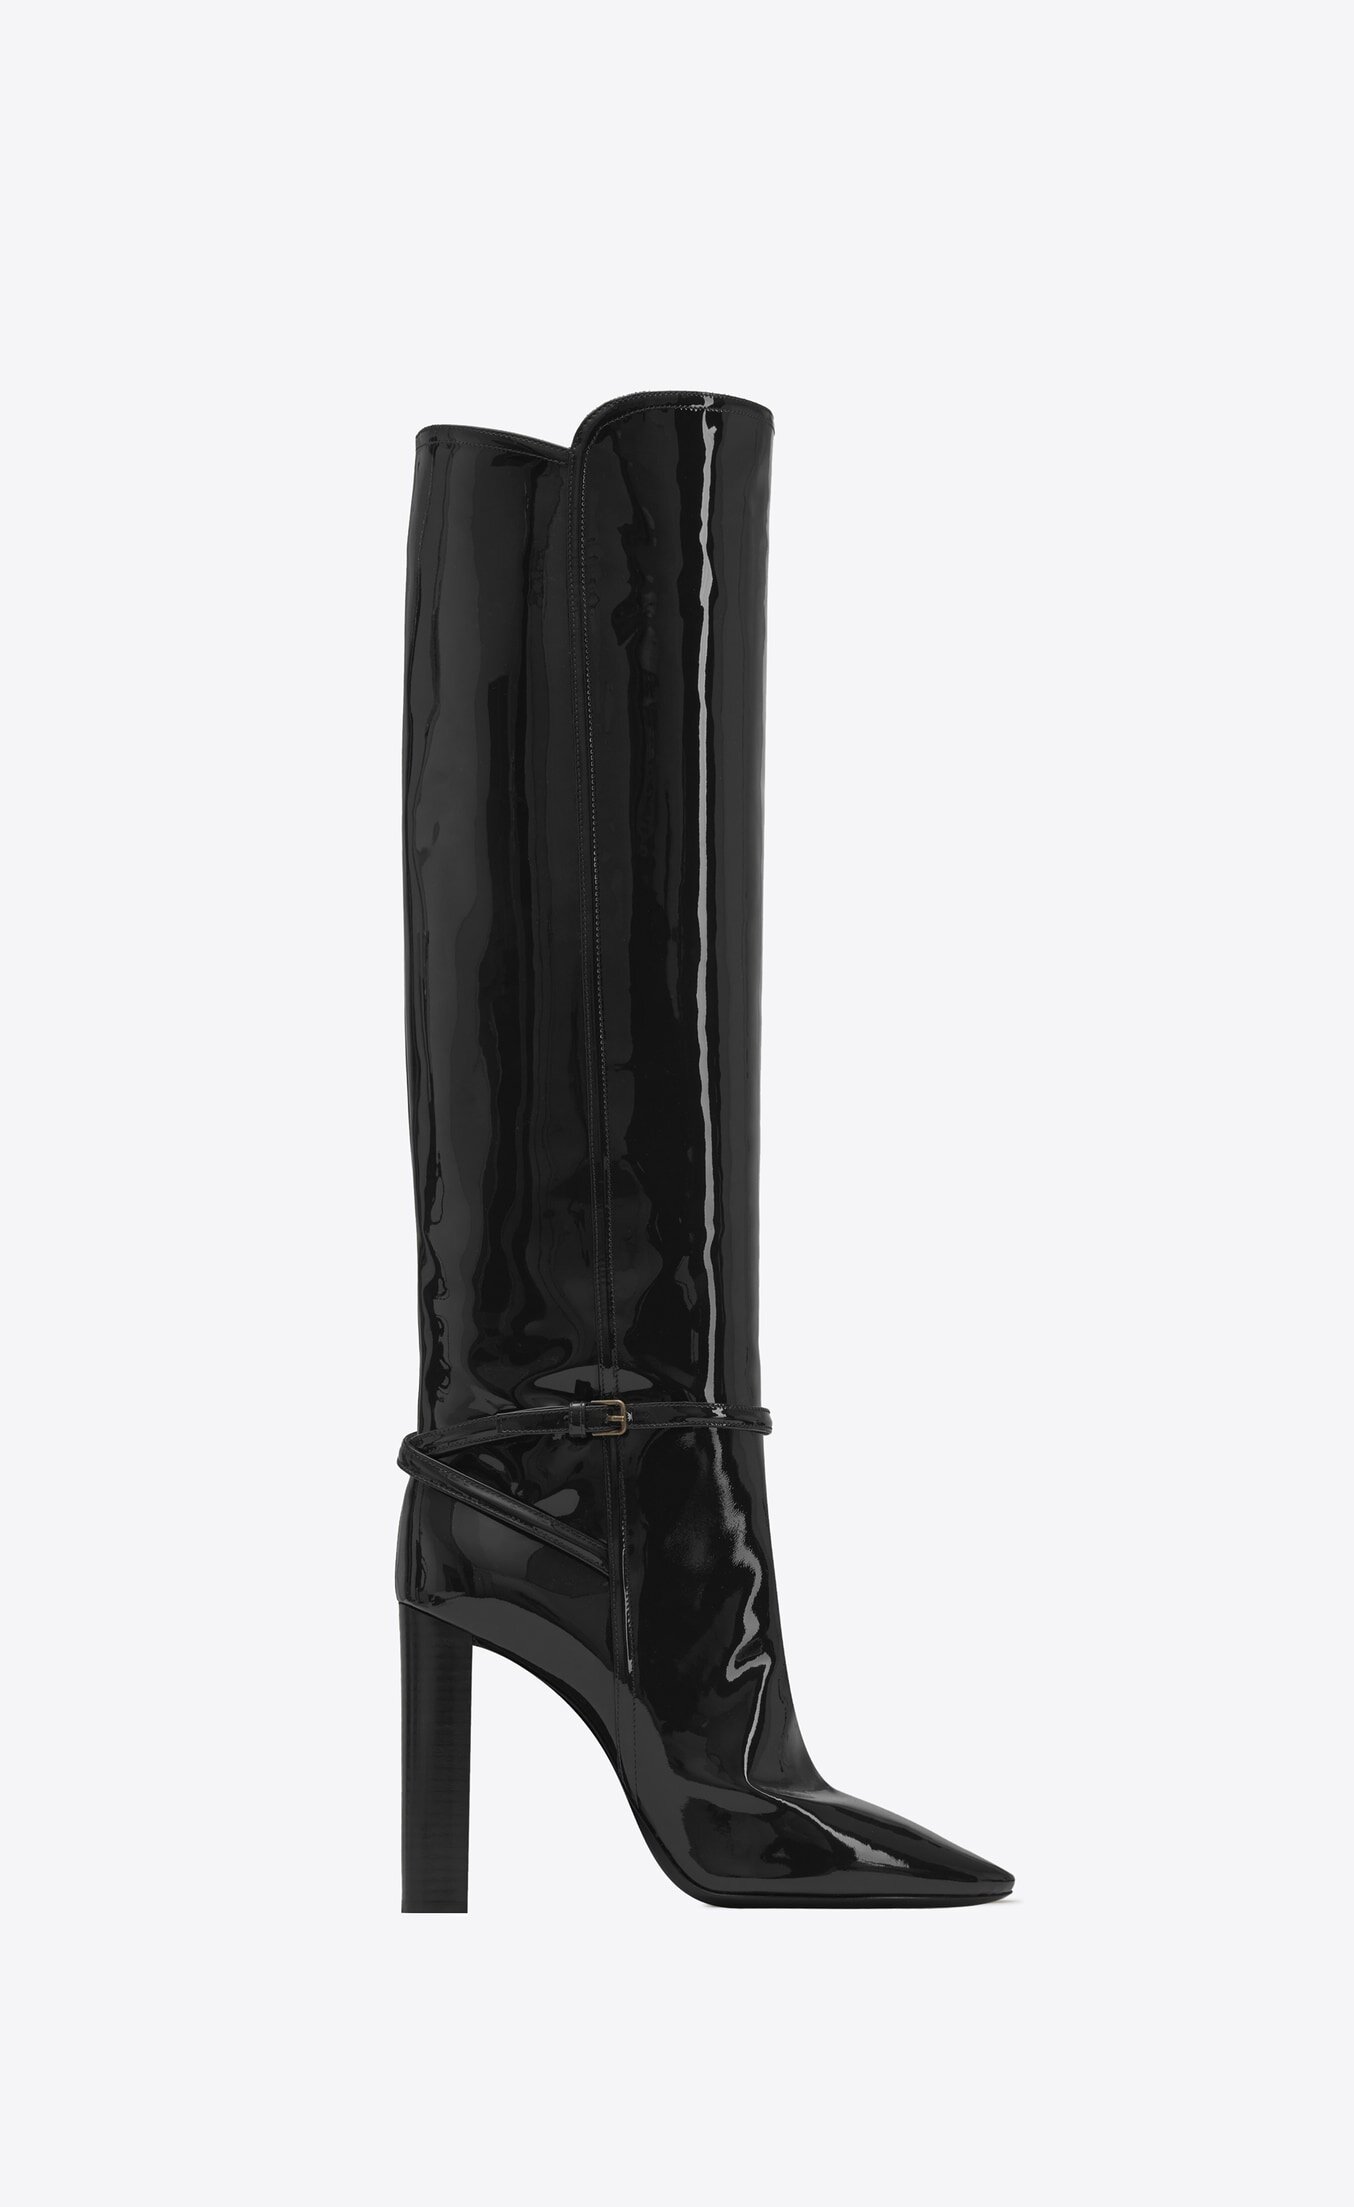 Saint Laurent 76 Knee-High Boots in Black Patent Leather — UFO No More